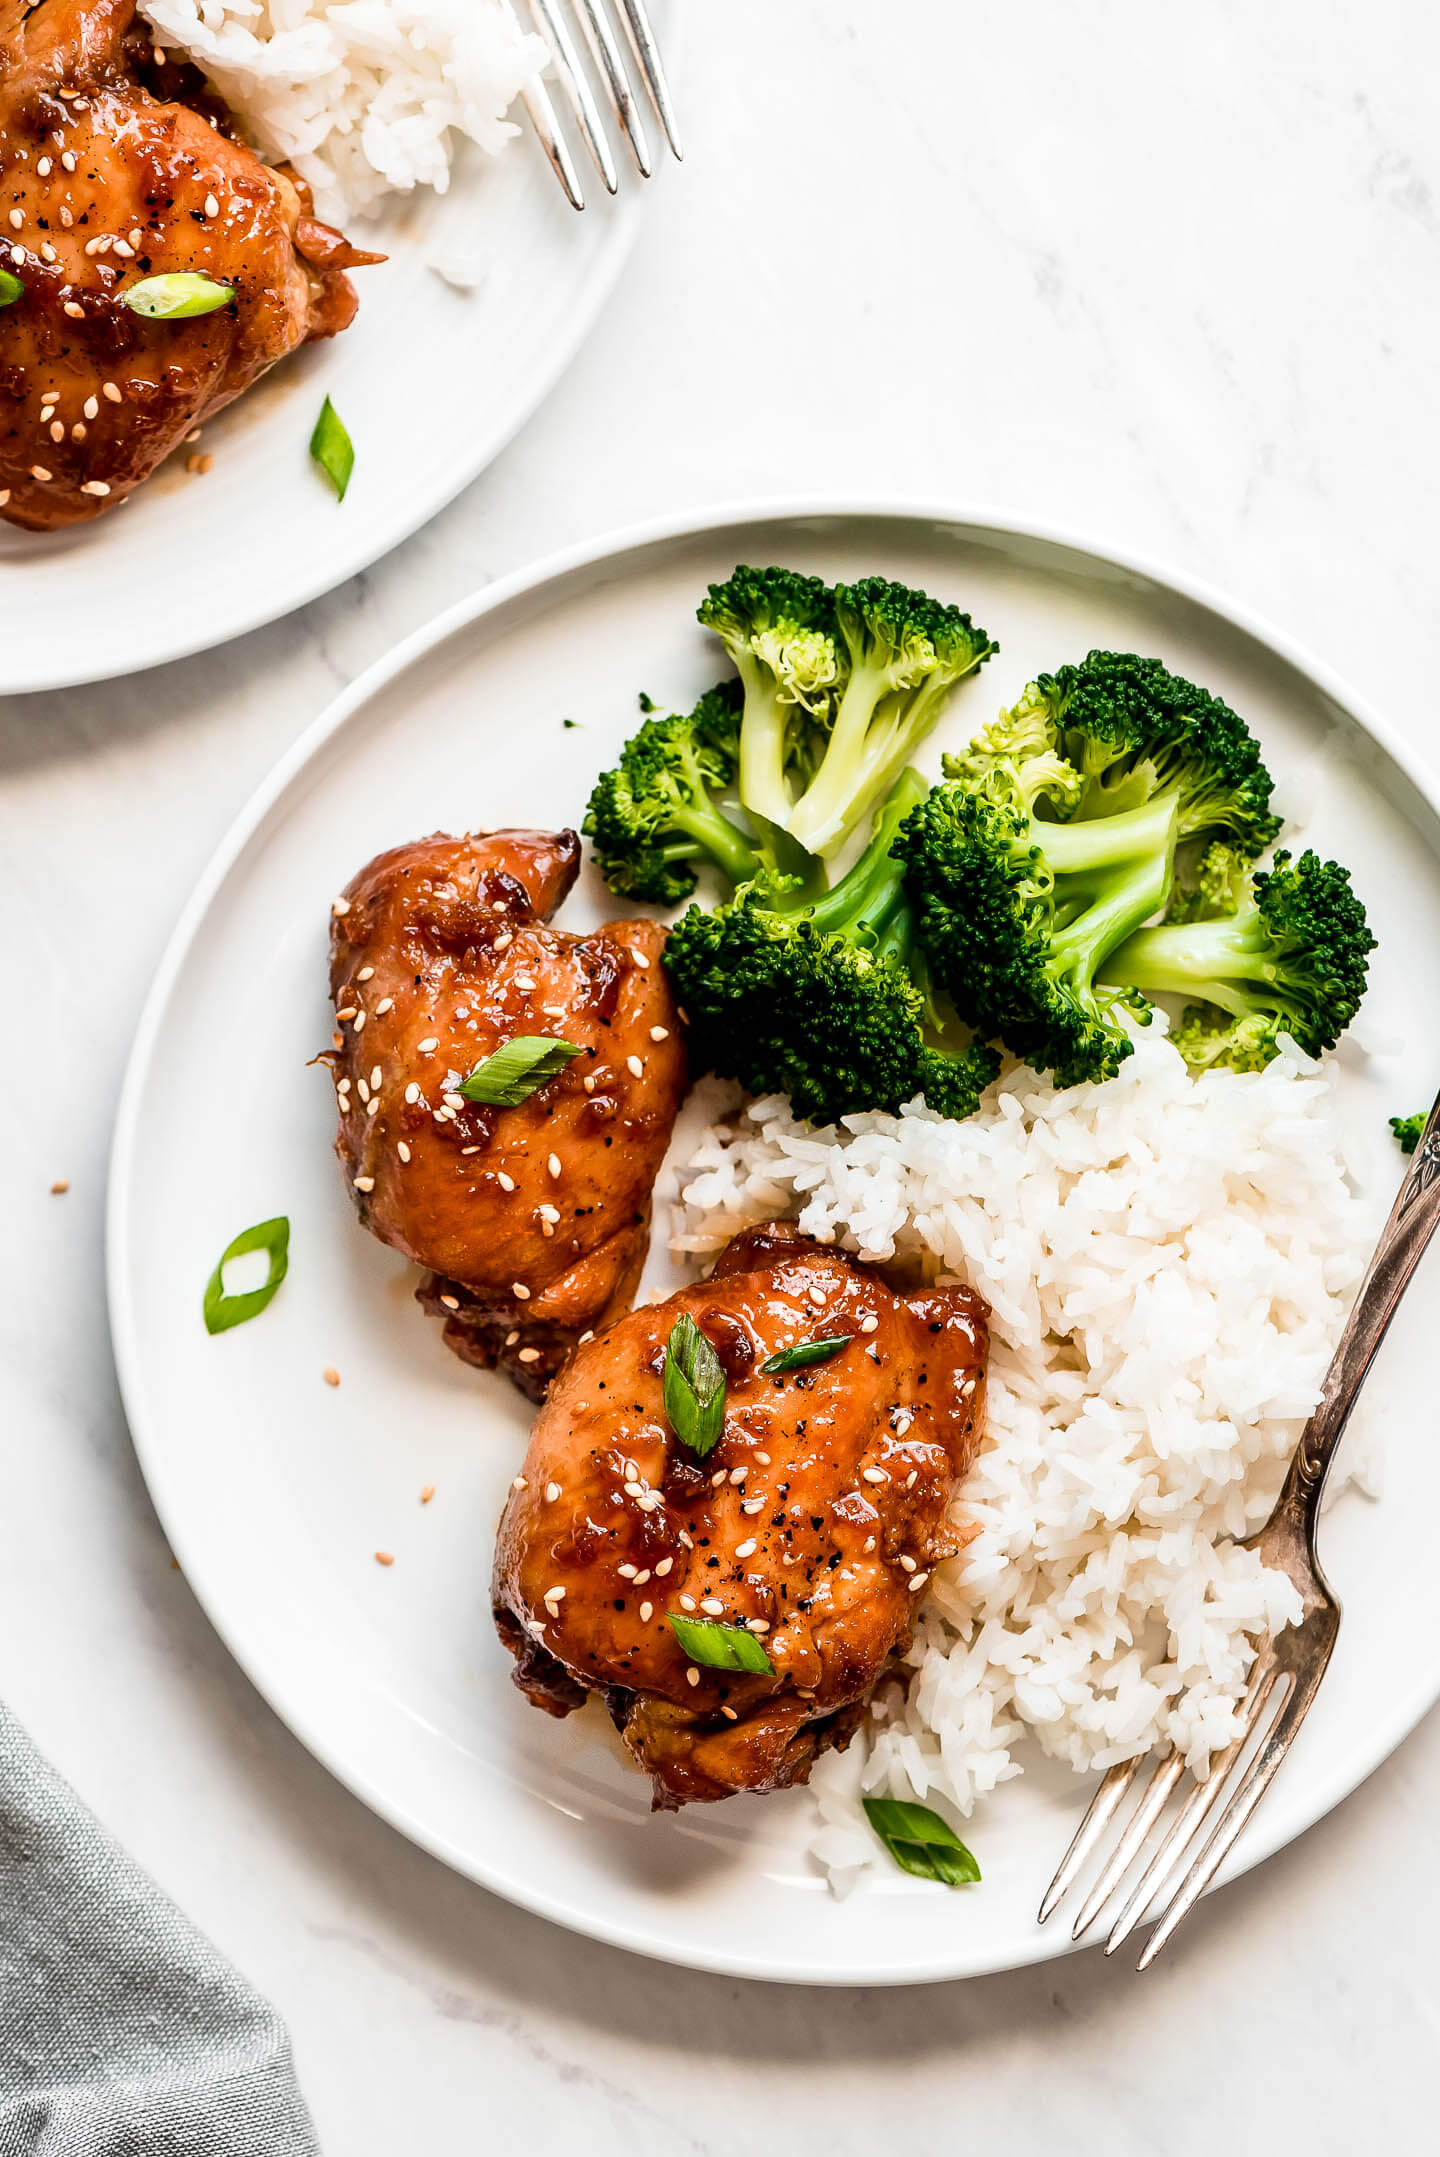 Plates of glazed chicken thighs, white rice, and broccoli.